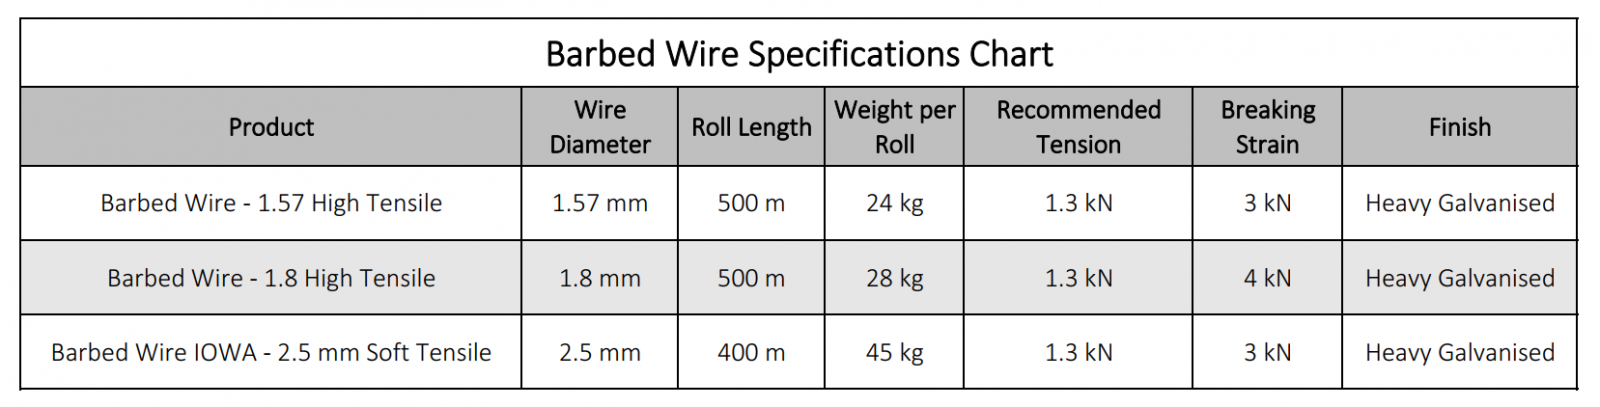 barbed-wire-specification